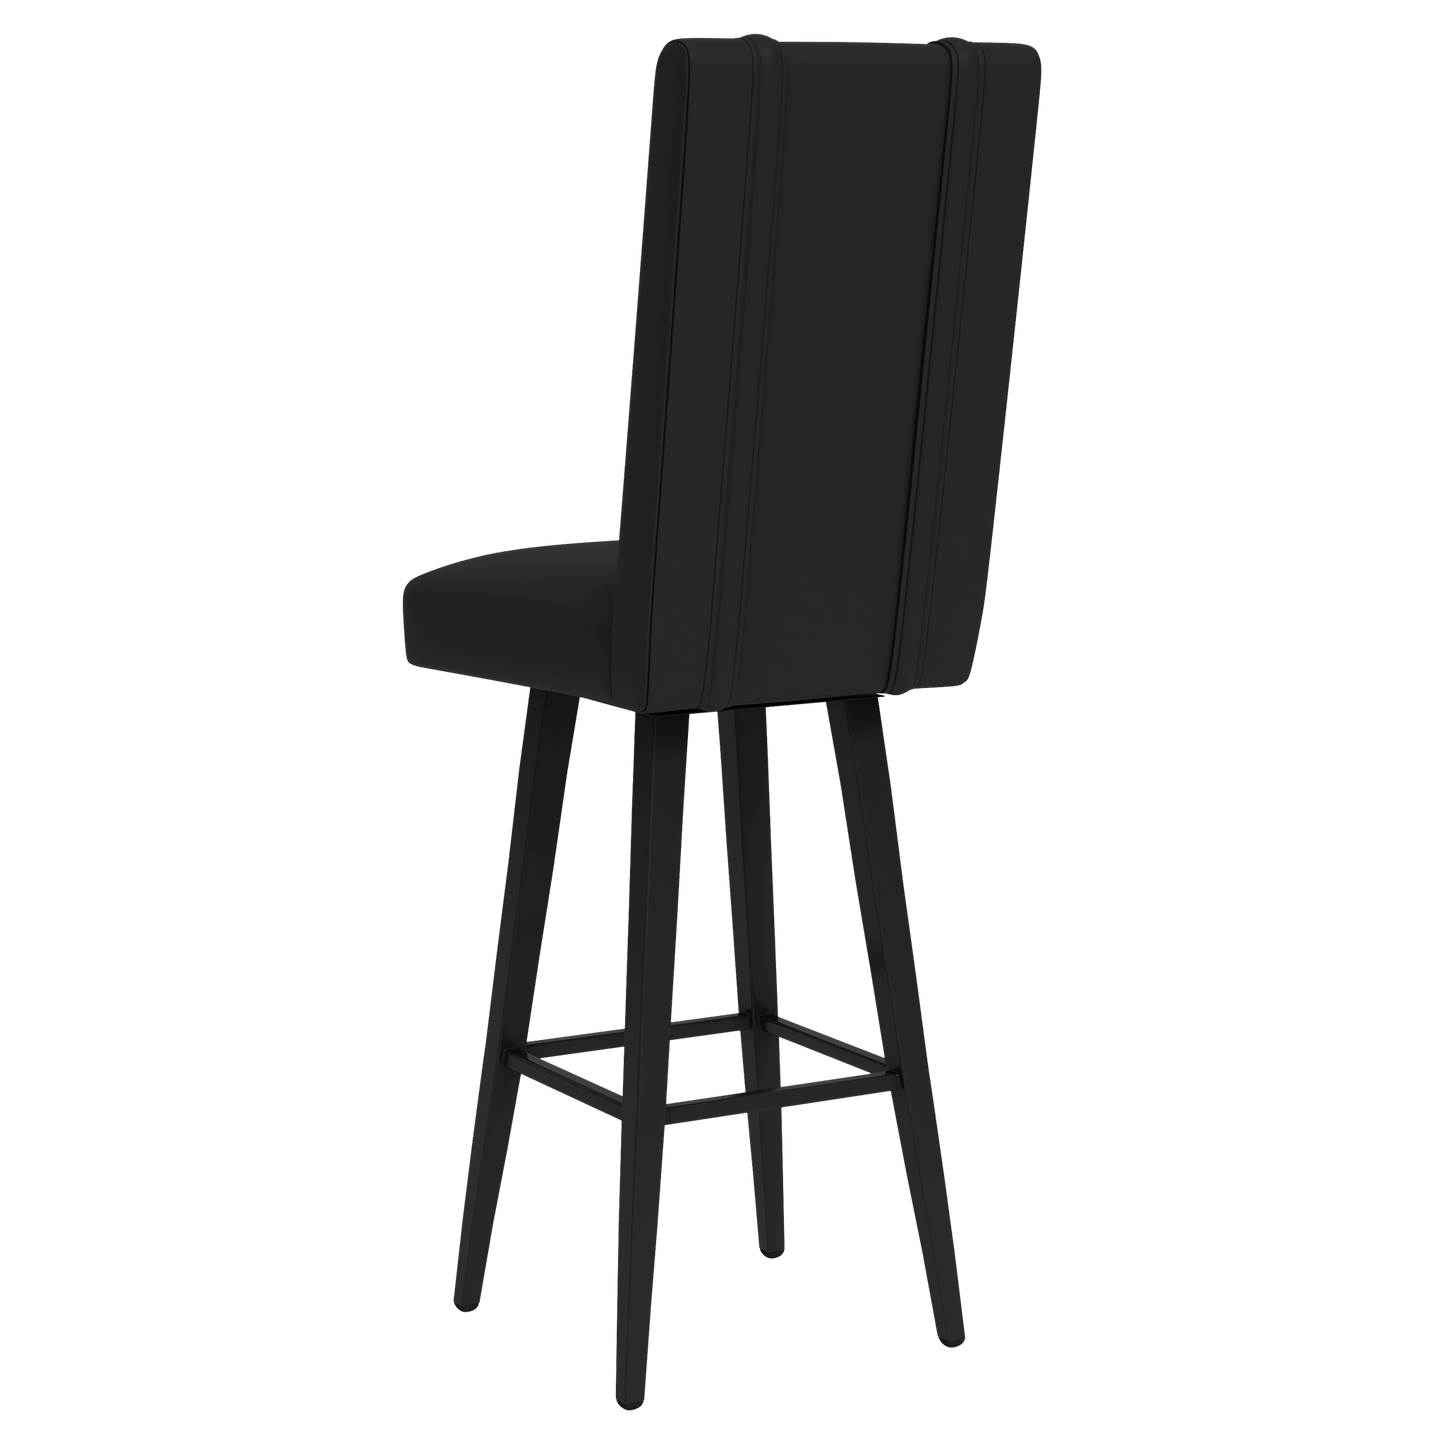 Swivel Bar Stool 2000 with Celtics Crossover Gaming Primary [CAN ONLY BE SHIPPED TO MASSACHUSETTS]